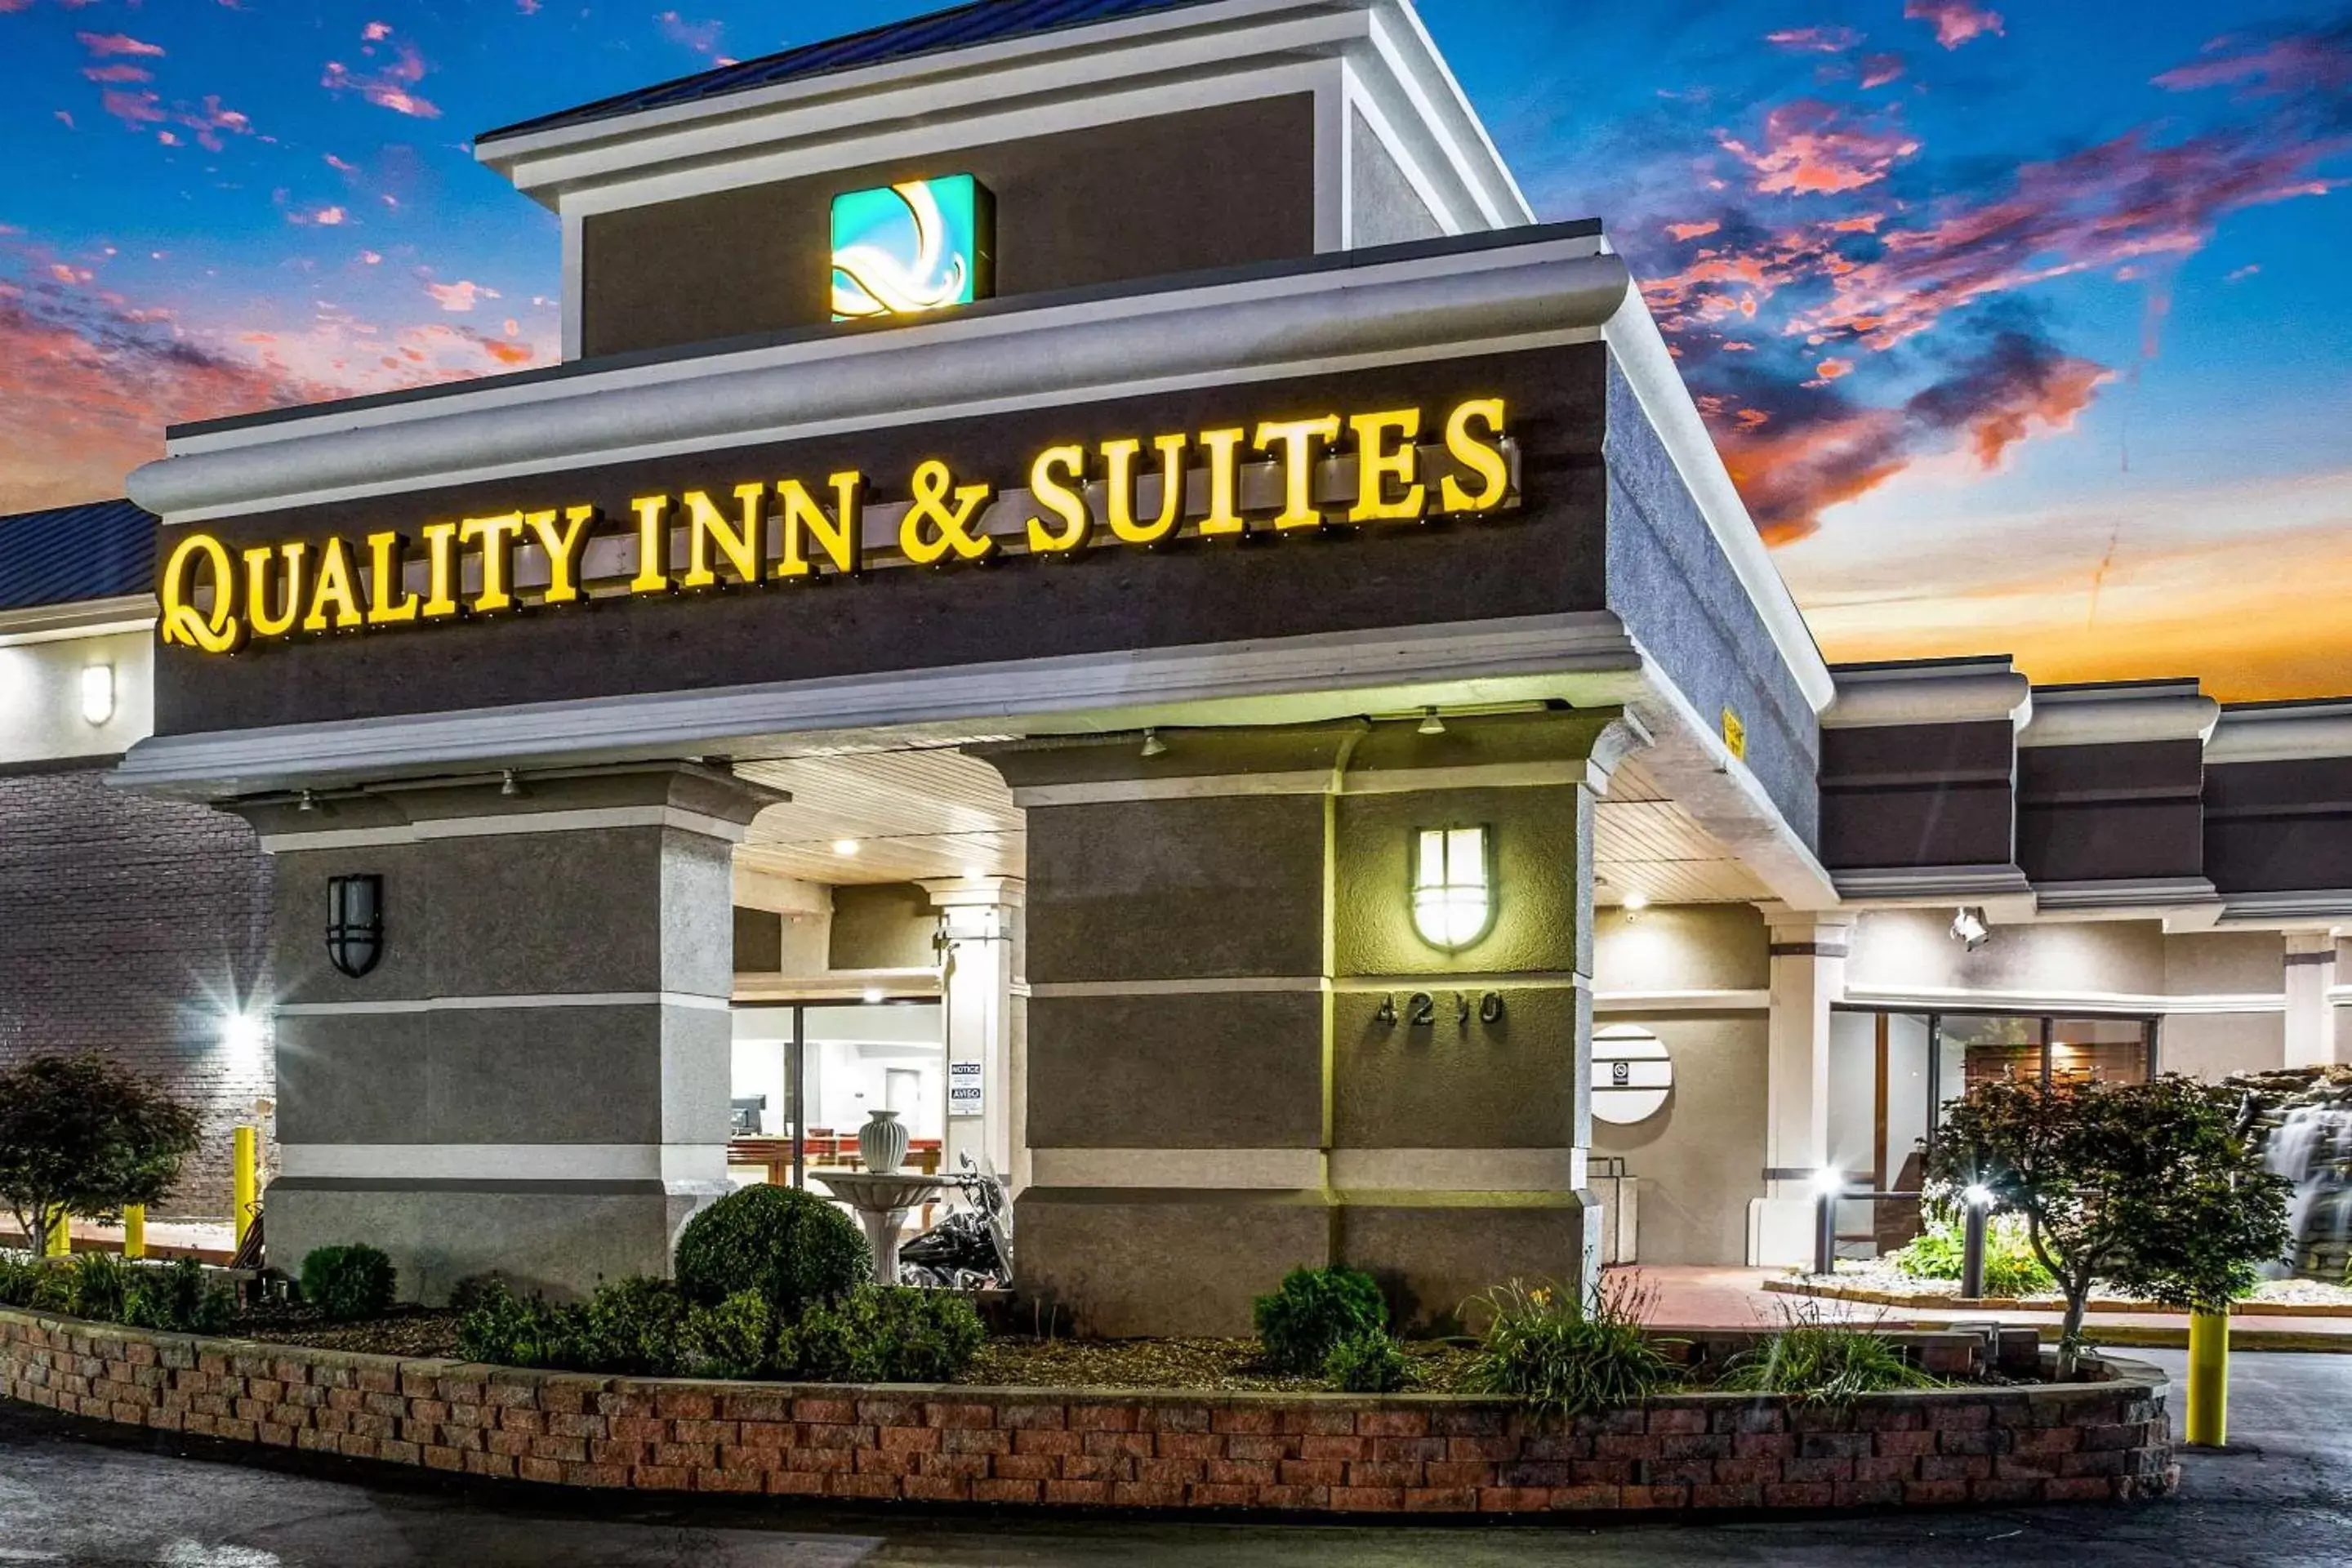 Other, Property Building in Quality Inn & Suites Kansas City - Independence I-70 East